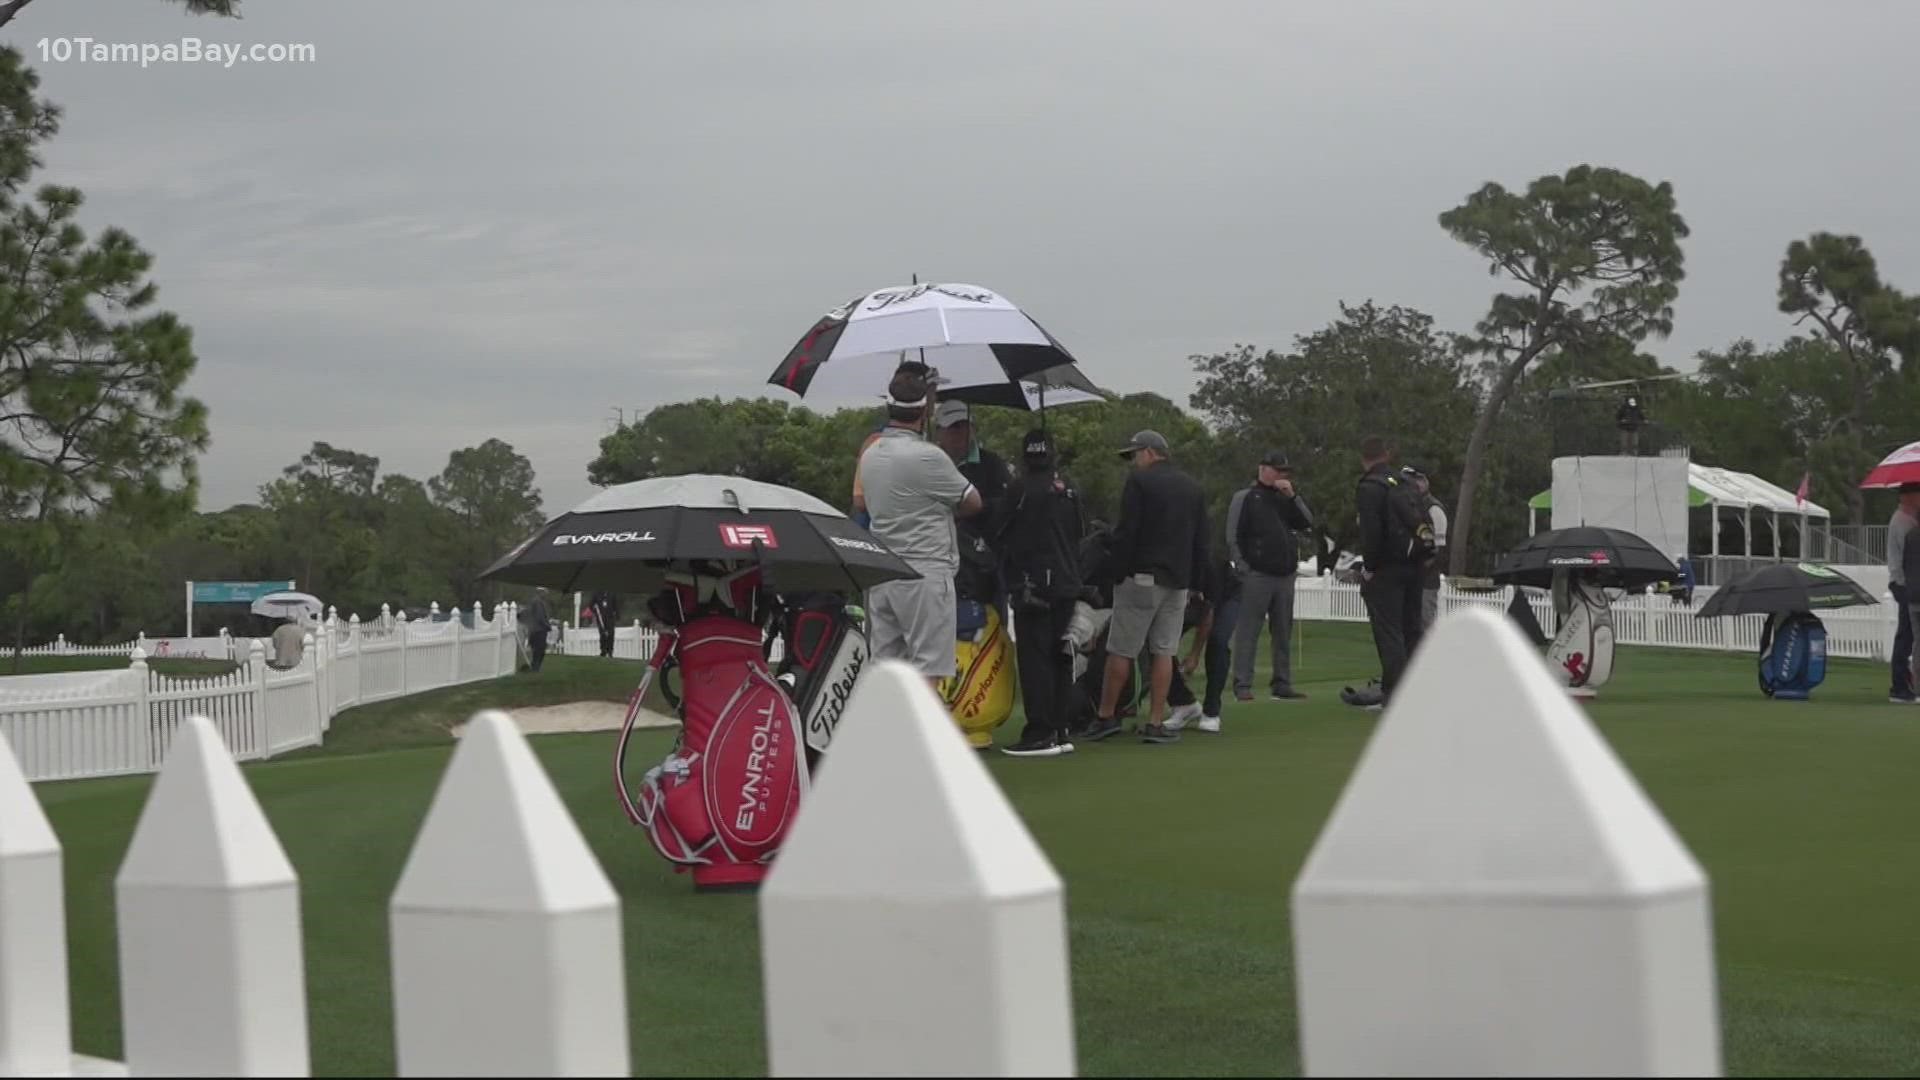 Lightning is the number one concern for golfers on the course.